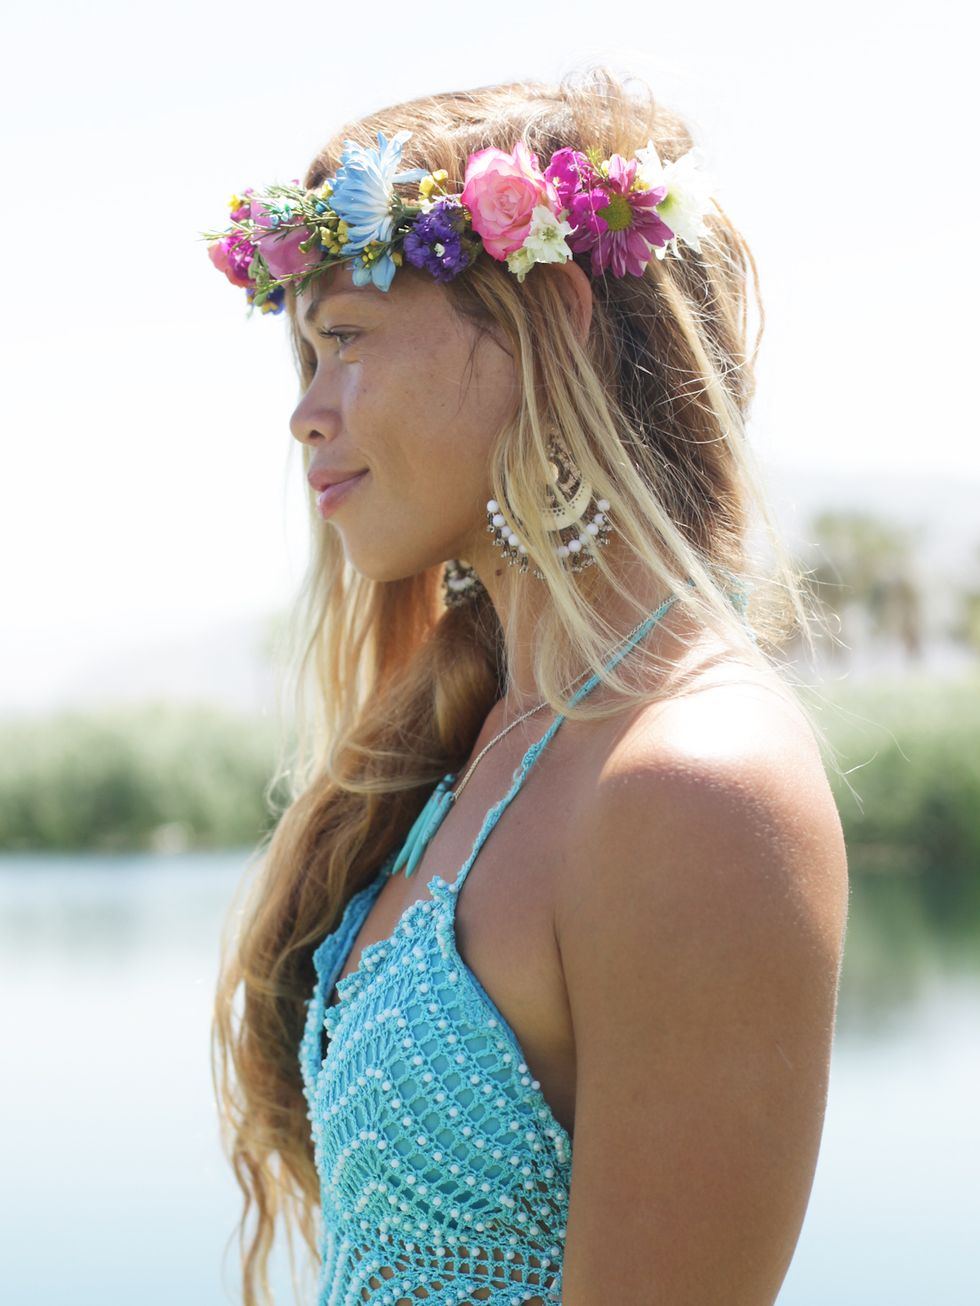 Hairstyle, Hair accessory, Headpiece, People in nature, Summer, Petal, Fashion accessory, Beauty, Headgear, Long hair, 